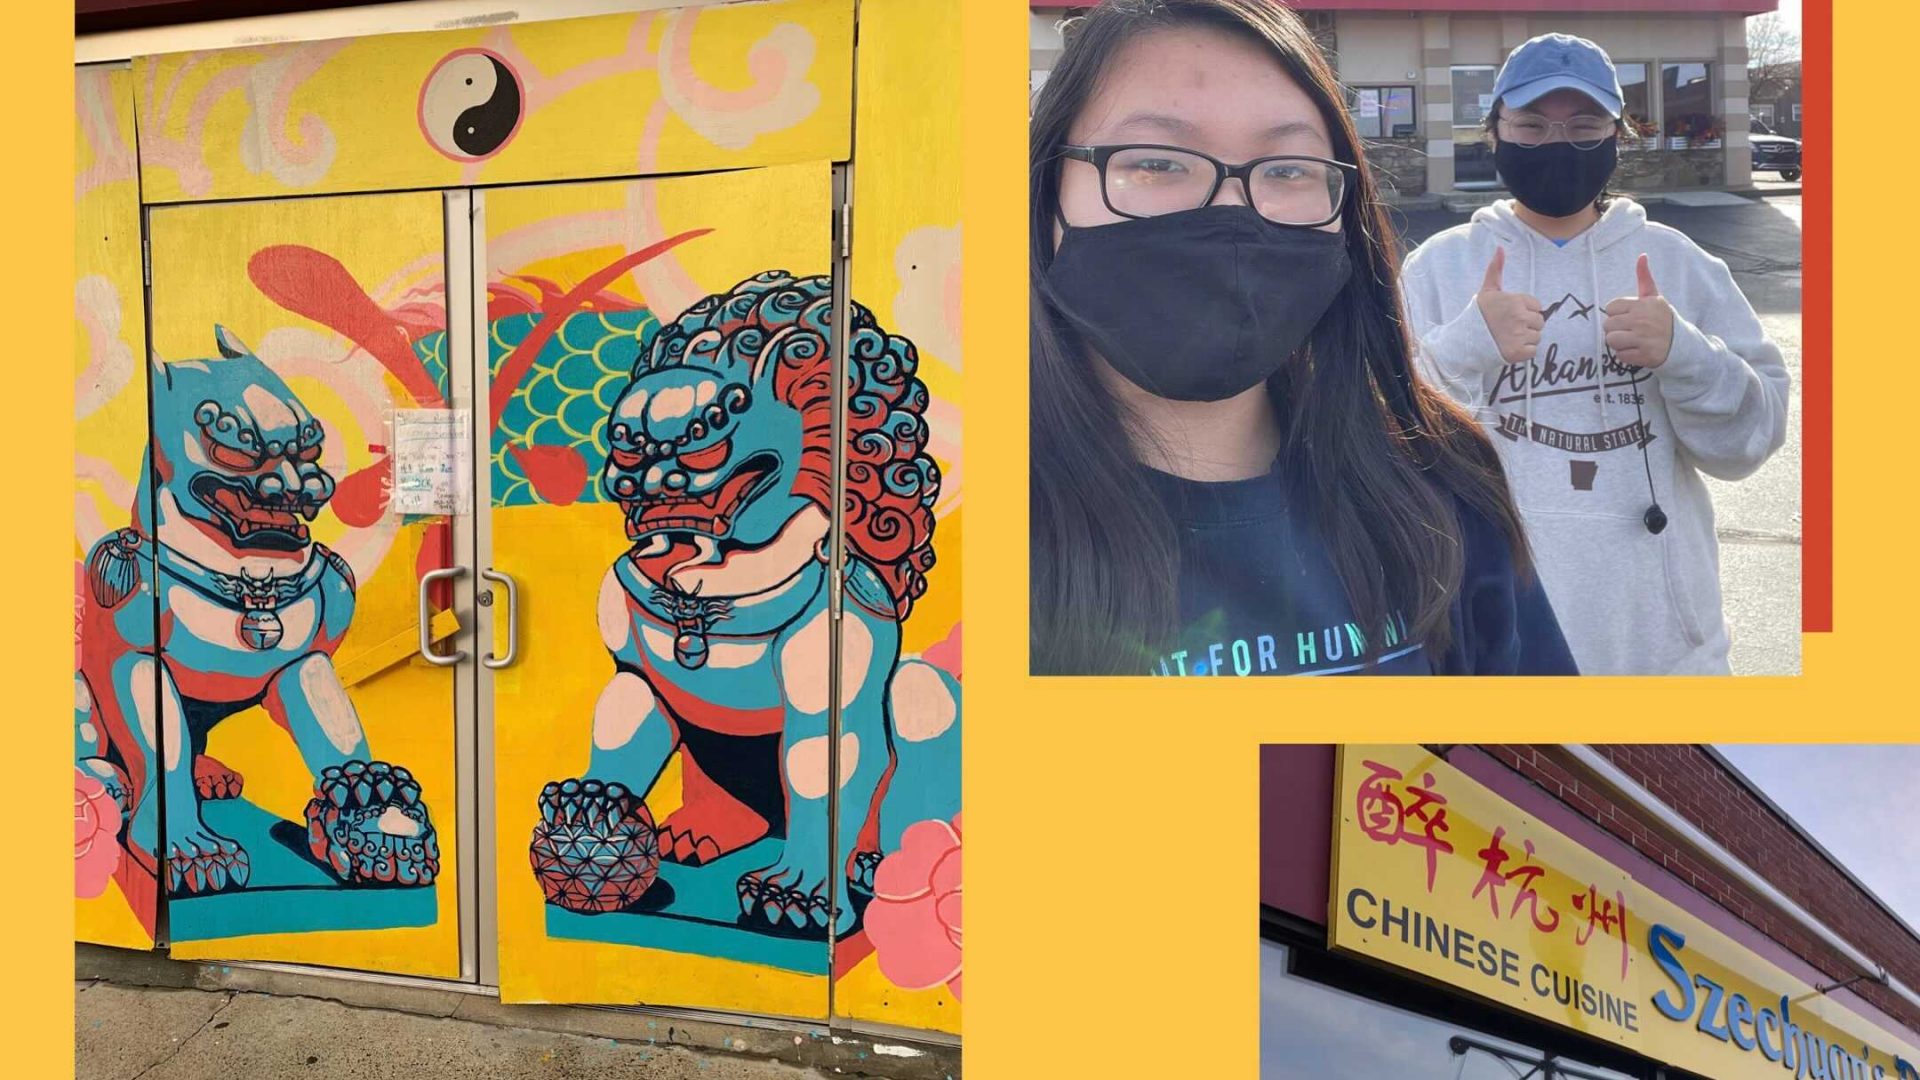 Yellow background. Photo on left: mural of Chinese guardian lions. Photo on top right: two people in front of a restaurant. Photo on bottom right: Chinese restaurant